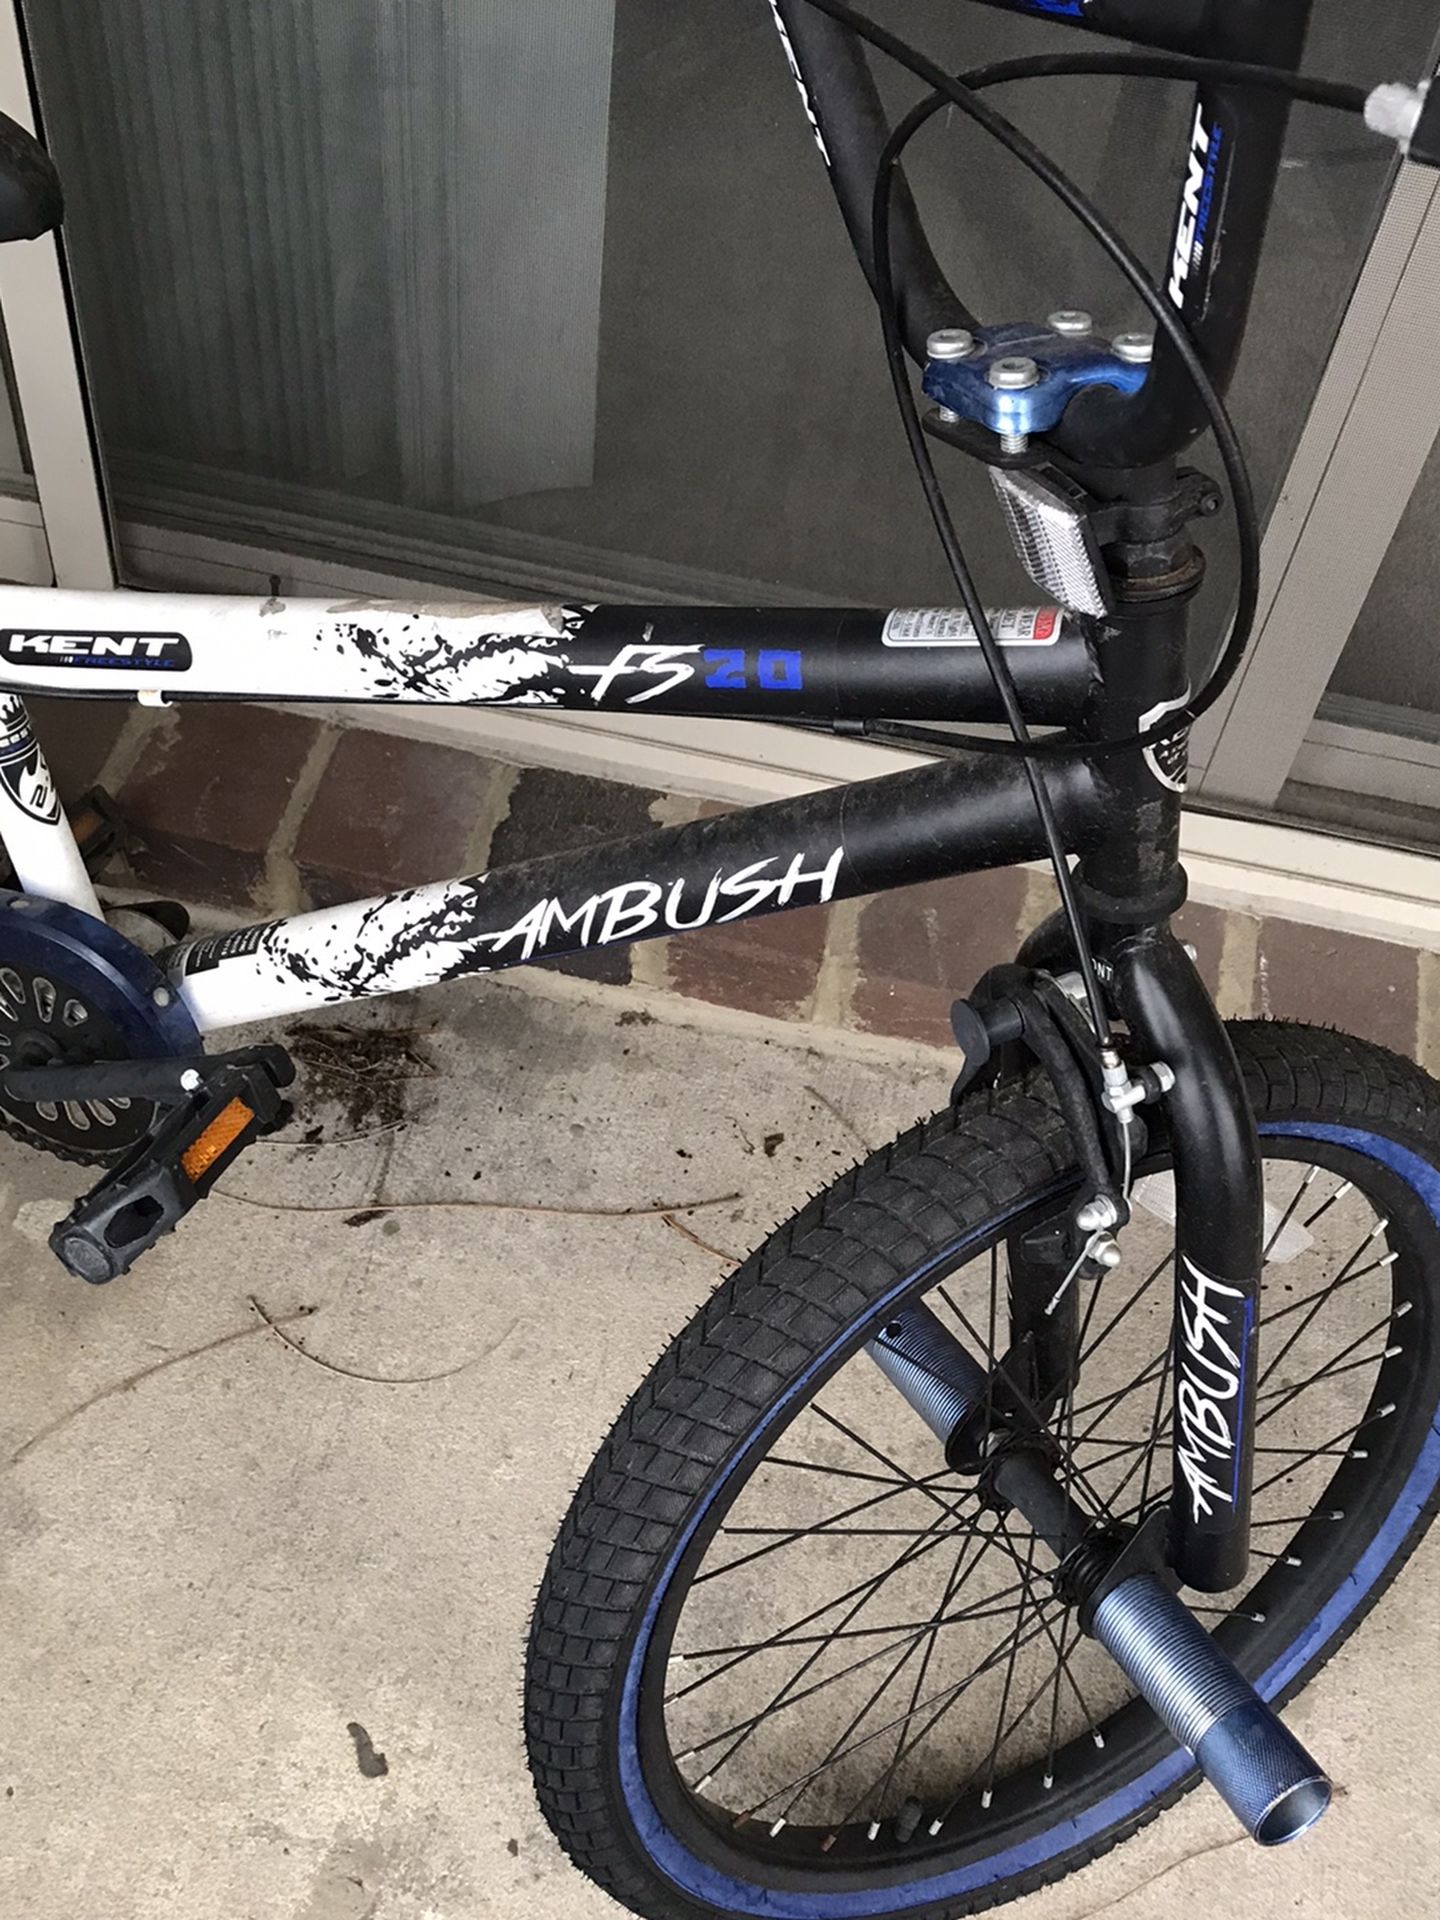 $200 For Both Kids Bikes For Sale Used One Time